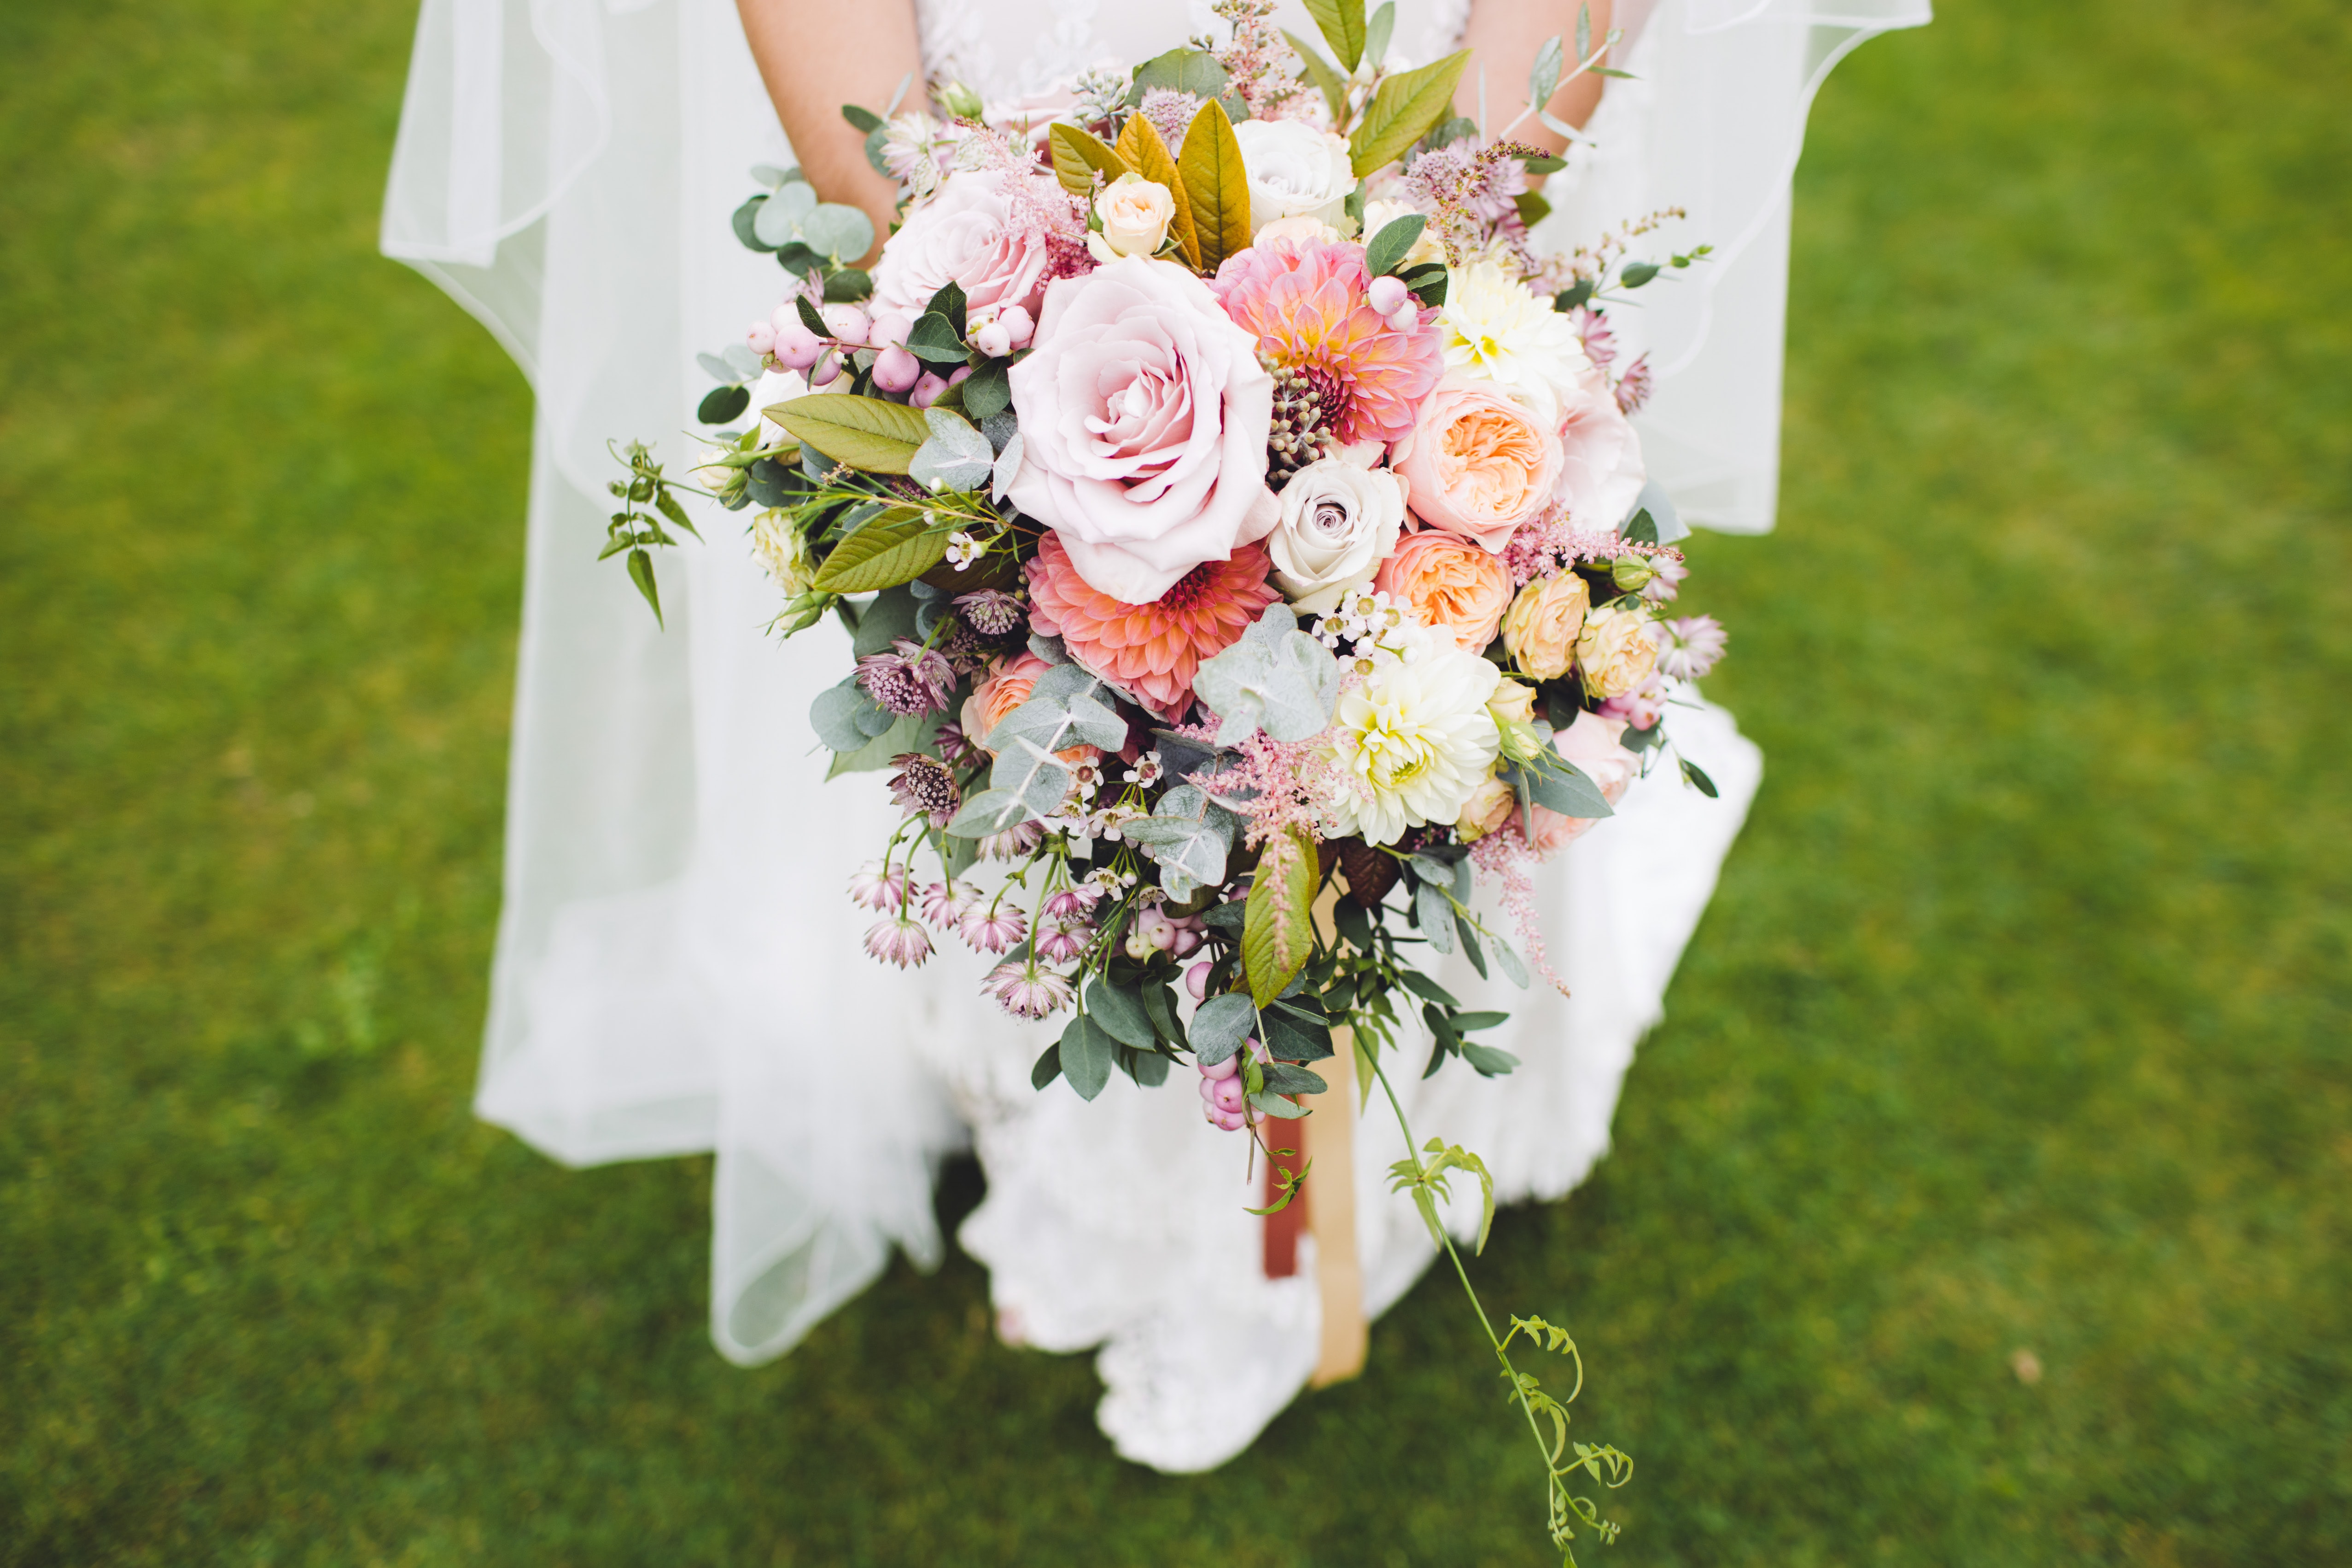 10 Questions You NEED to Ask Before Booking a Florist